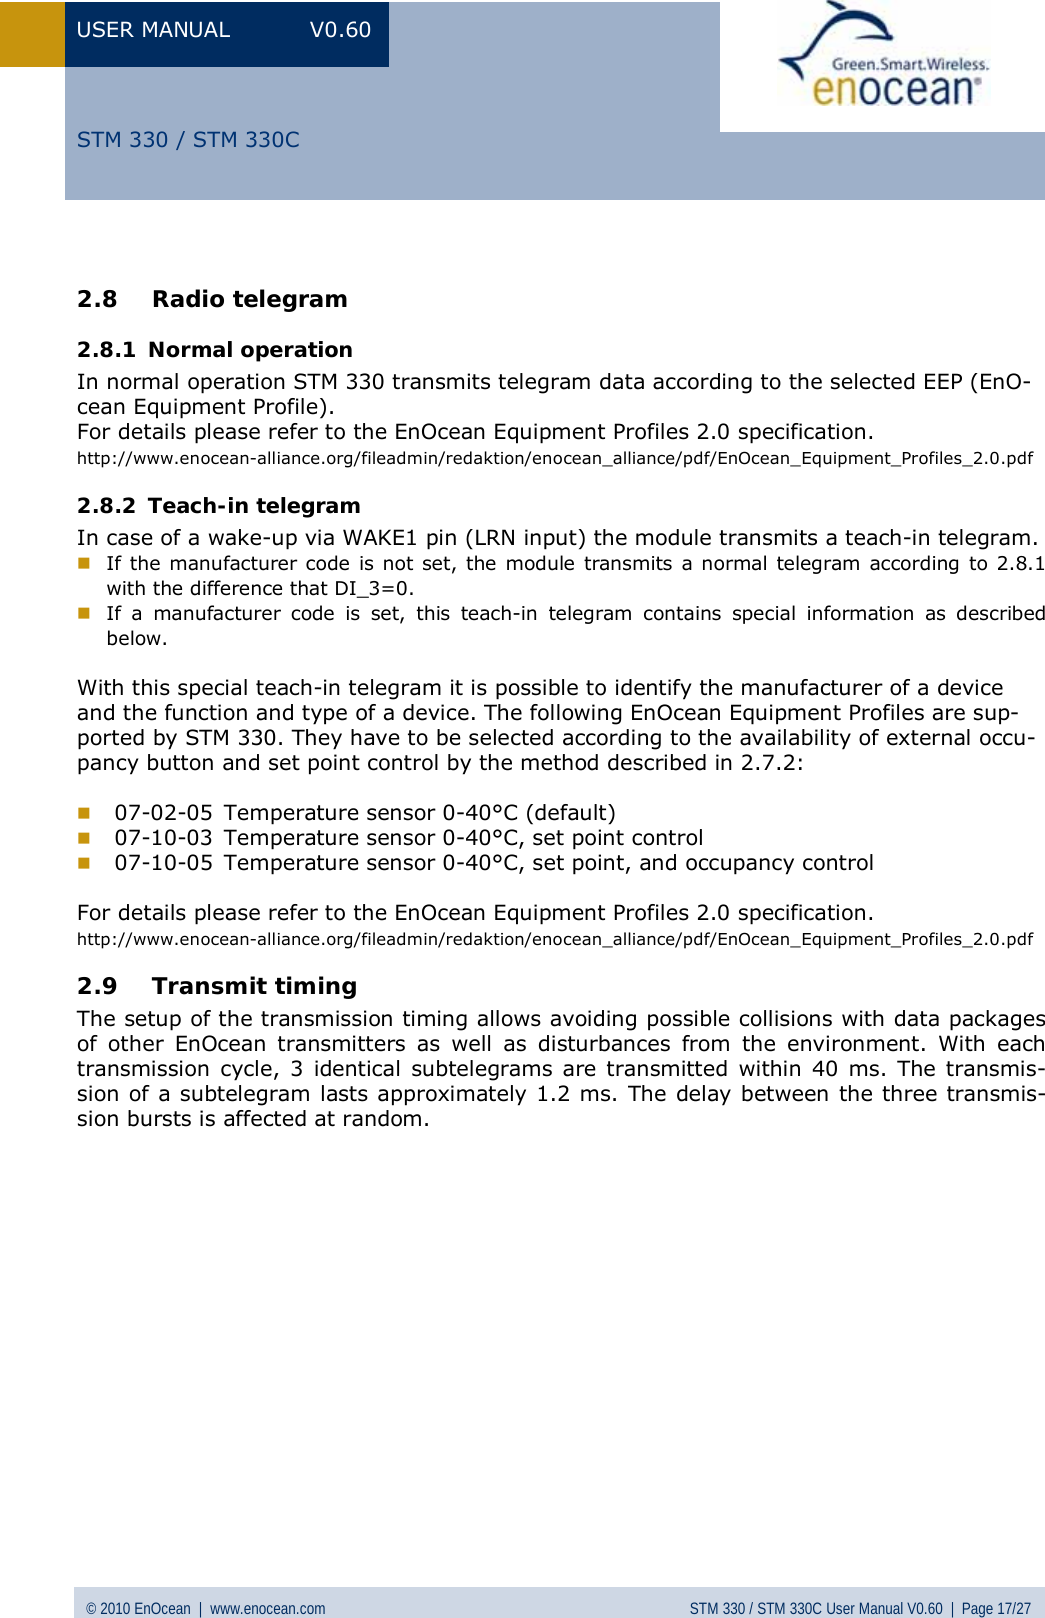 USER MANUAL V0.60 © 2010 EnOcean  |  www.enocean.com STM 330 / STM 330C User Manual V0.60  |  Page 17/27  STM 330 / STM 330C 2.8 Radio telegram 2.8.1 Normal operation In normal operation STM 330 transmits telegram data according to the selected EEP (EnO-cean Equipment Profile). For details please refer to the EnOcean Equipment Profiles 2.0 specification. http://www.enocean-alliance.org/fileadmin/redaktion/enocean_alliance/pdf/EnOcean_Equipment_Profiles_2.0.pdf 2.8.2 Teach-in telegram In case of a wake-up via WAKE1 pin (LRN input) the module transmits a teach-in telegram.  If the manufacturer code is not set, the module transmits a normal telegram according to 2.8.1 with the difference that DI_3=0.  If a manufacturer code is set, this teach-in telegram contains special information as described below.   With this special teach-in telegram it is possible to identify the manufacturer of a device and the function and type of a device. The following EnOcean Equipment Profiles are sup-ported by STM 330. They have to be selected according to the availability of external occu-pancy button and set point control by the method described in 2.7.2:   07-02-05  Temperature sensor 0-40°C (default)  07-10-03  Temperature sensor 0-40°C, set point control  07-10-05  Temperature sensor 0-40°C, set point, and occupancy control  For details please refer to the EnOcean Equipment Profiles 2.0 specification. http://www.enocean-alliance.org/fileadmin/redaktion/enocean_alliance/pdf/EnOcean_Equipment_Profiles_2.0.pdf 2.9 Transmit timing  The setup of the transmission timing allows avoiding possible collisions with data packages of other EnOcean transmitters as well as disturbances from the environment. With each transmission cycle, 3 identical subtelegrams are transmitted within 40 ms. The transmis-sion of a subtelegram lasts approximately 1.2 ms. The delay between the three transmis-sion bursts is affected at random.  